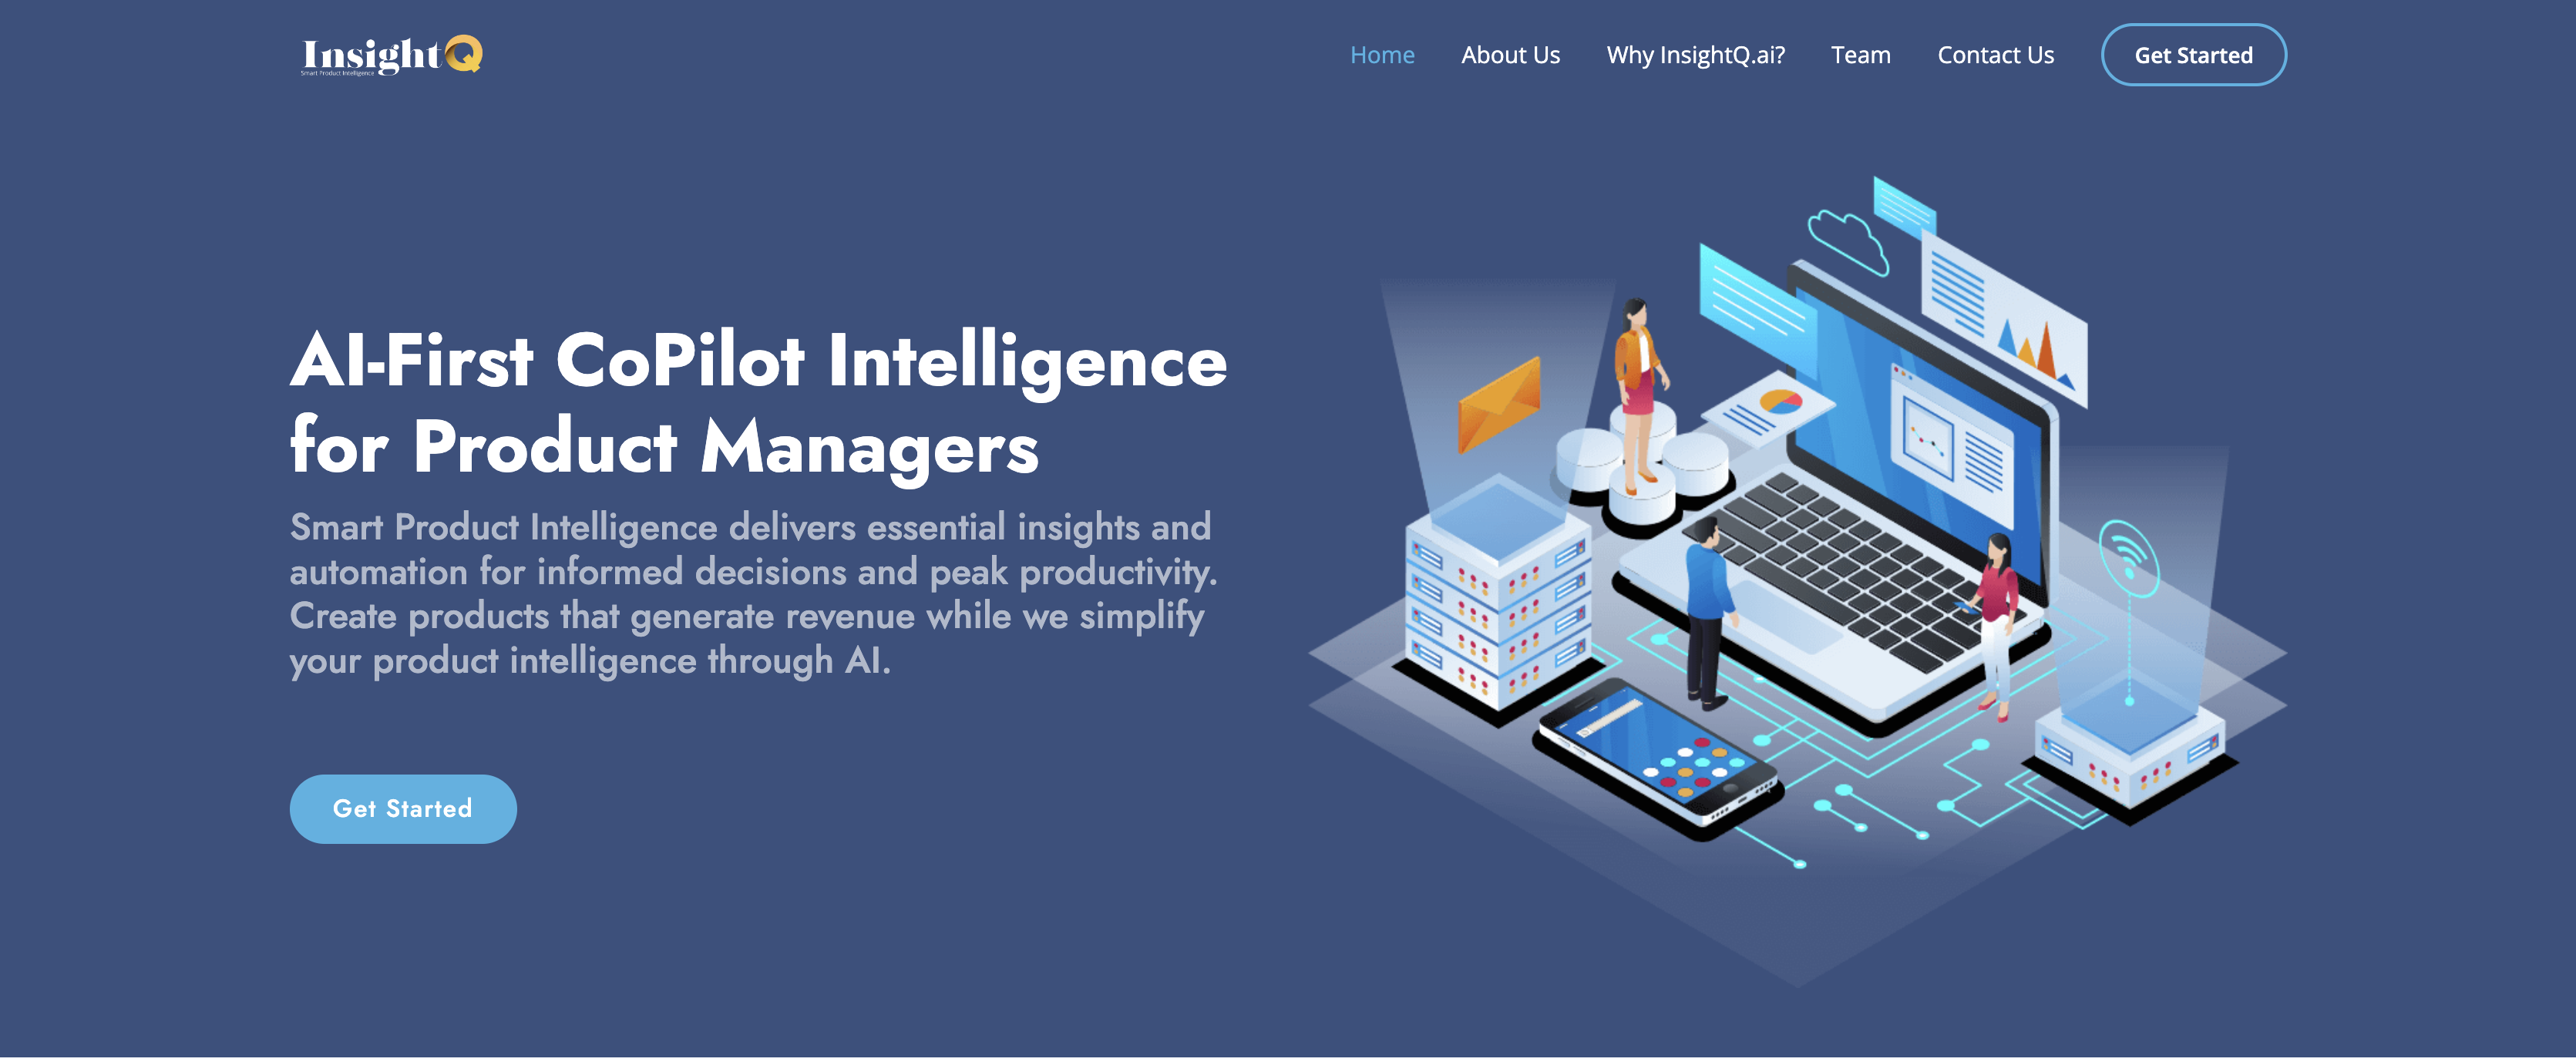 insightq - AI first copilot intelligence for product managers